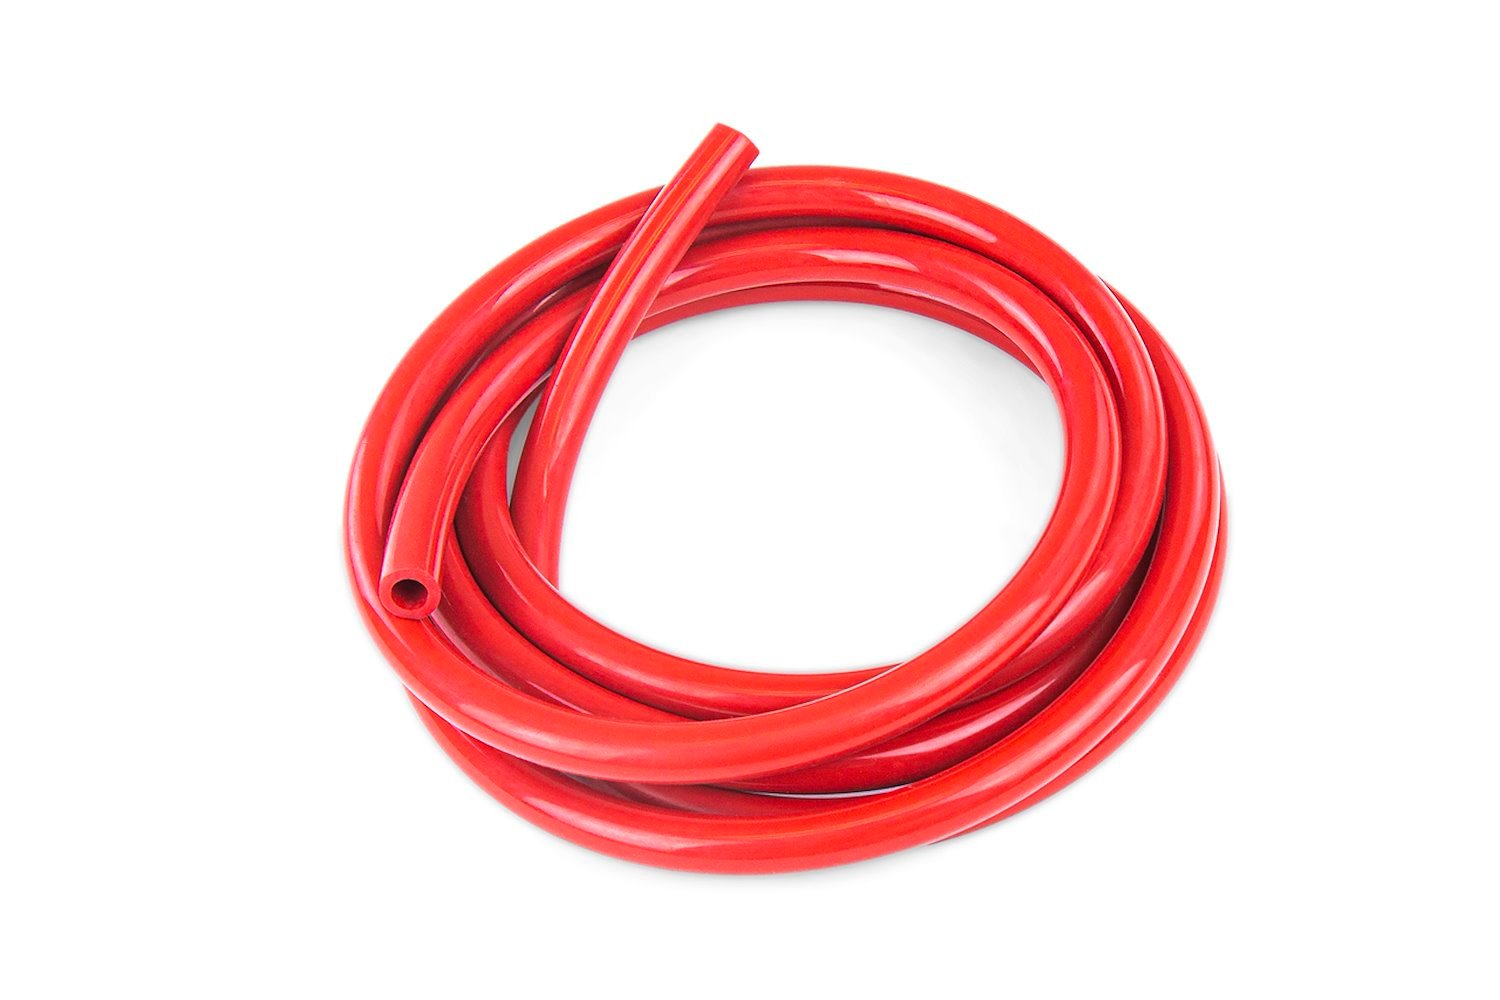 HTSVH5-REDx25 High-Temperature Silicone Vacuum Hose Tubing, 13/64 in. ID, 25 ft. Roll, Red